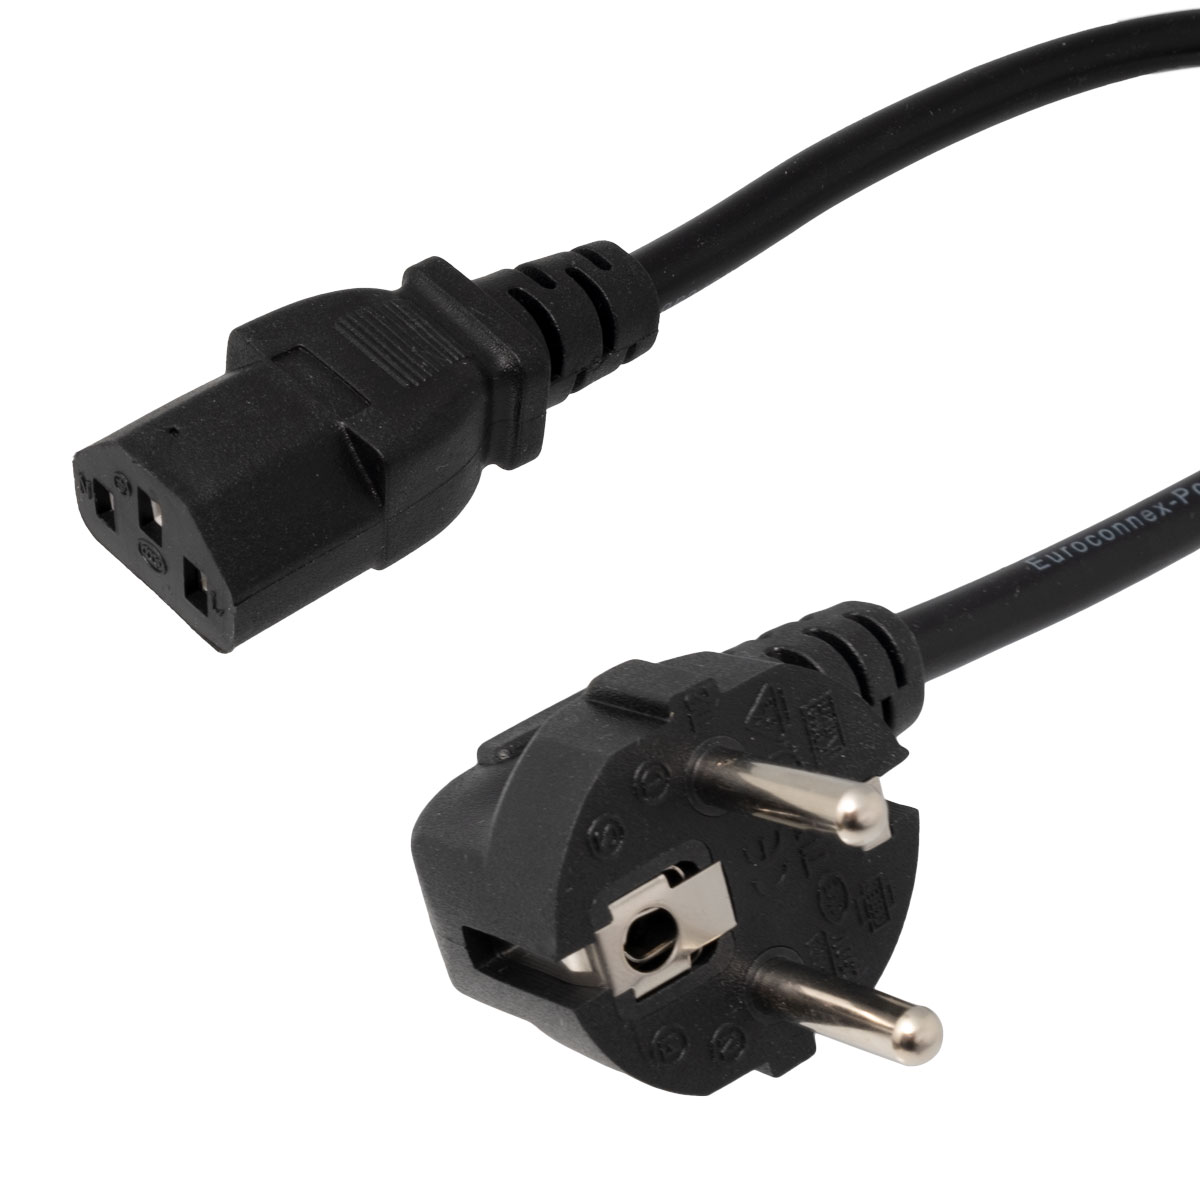 Schuko Male to IEC C13 Power Cable, Black, 1.8m